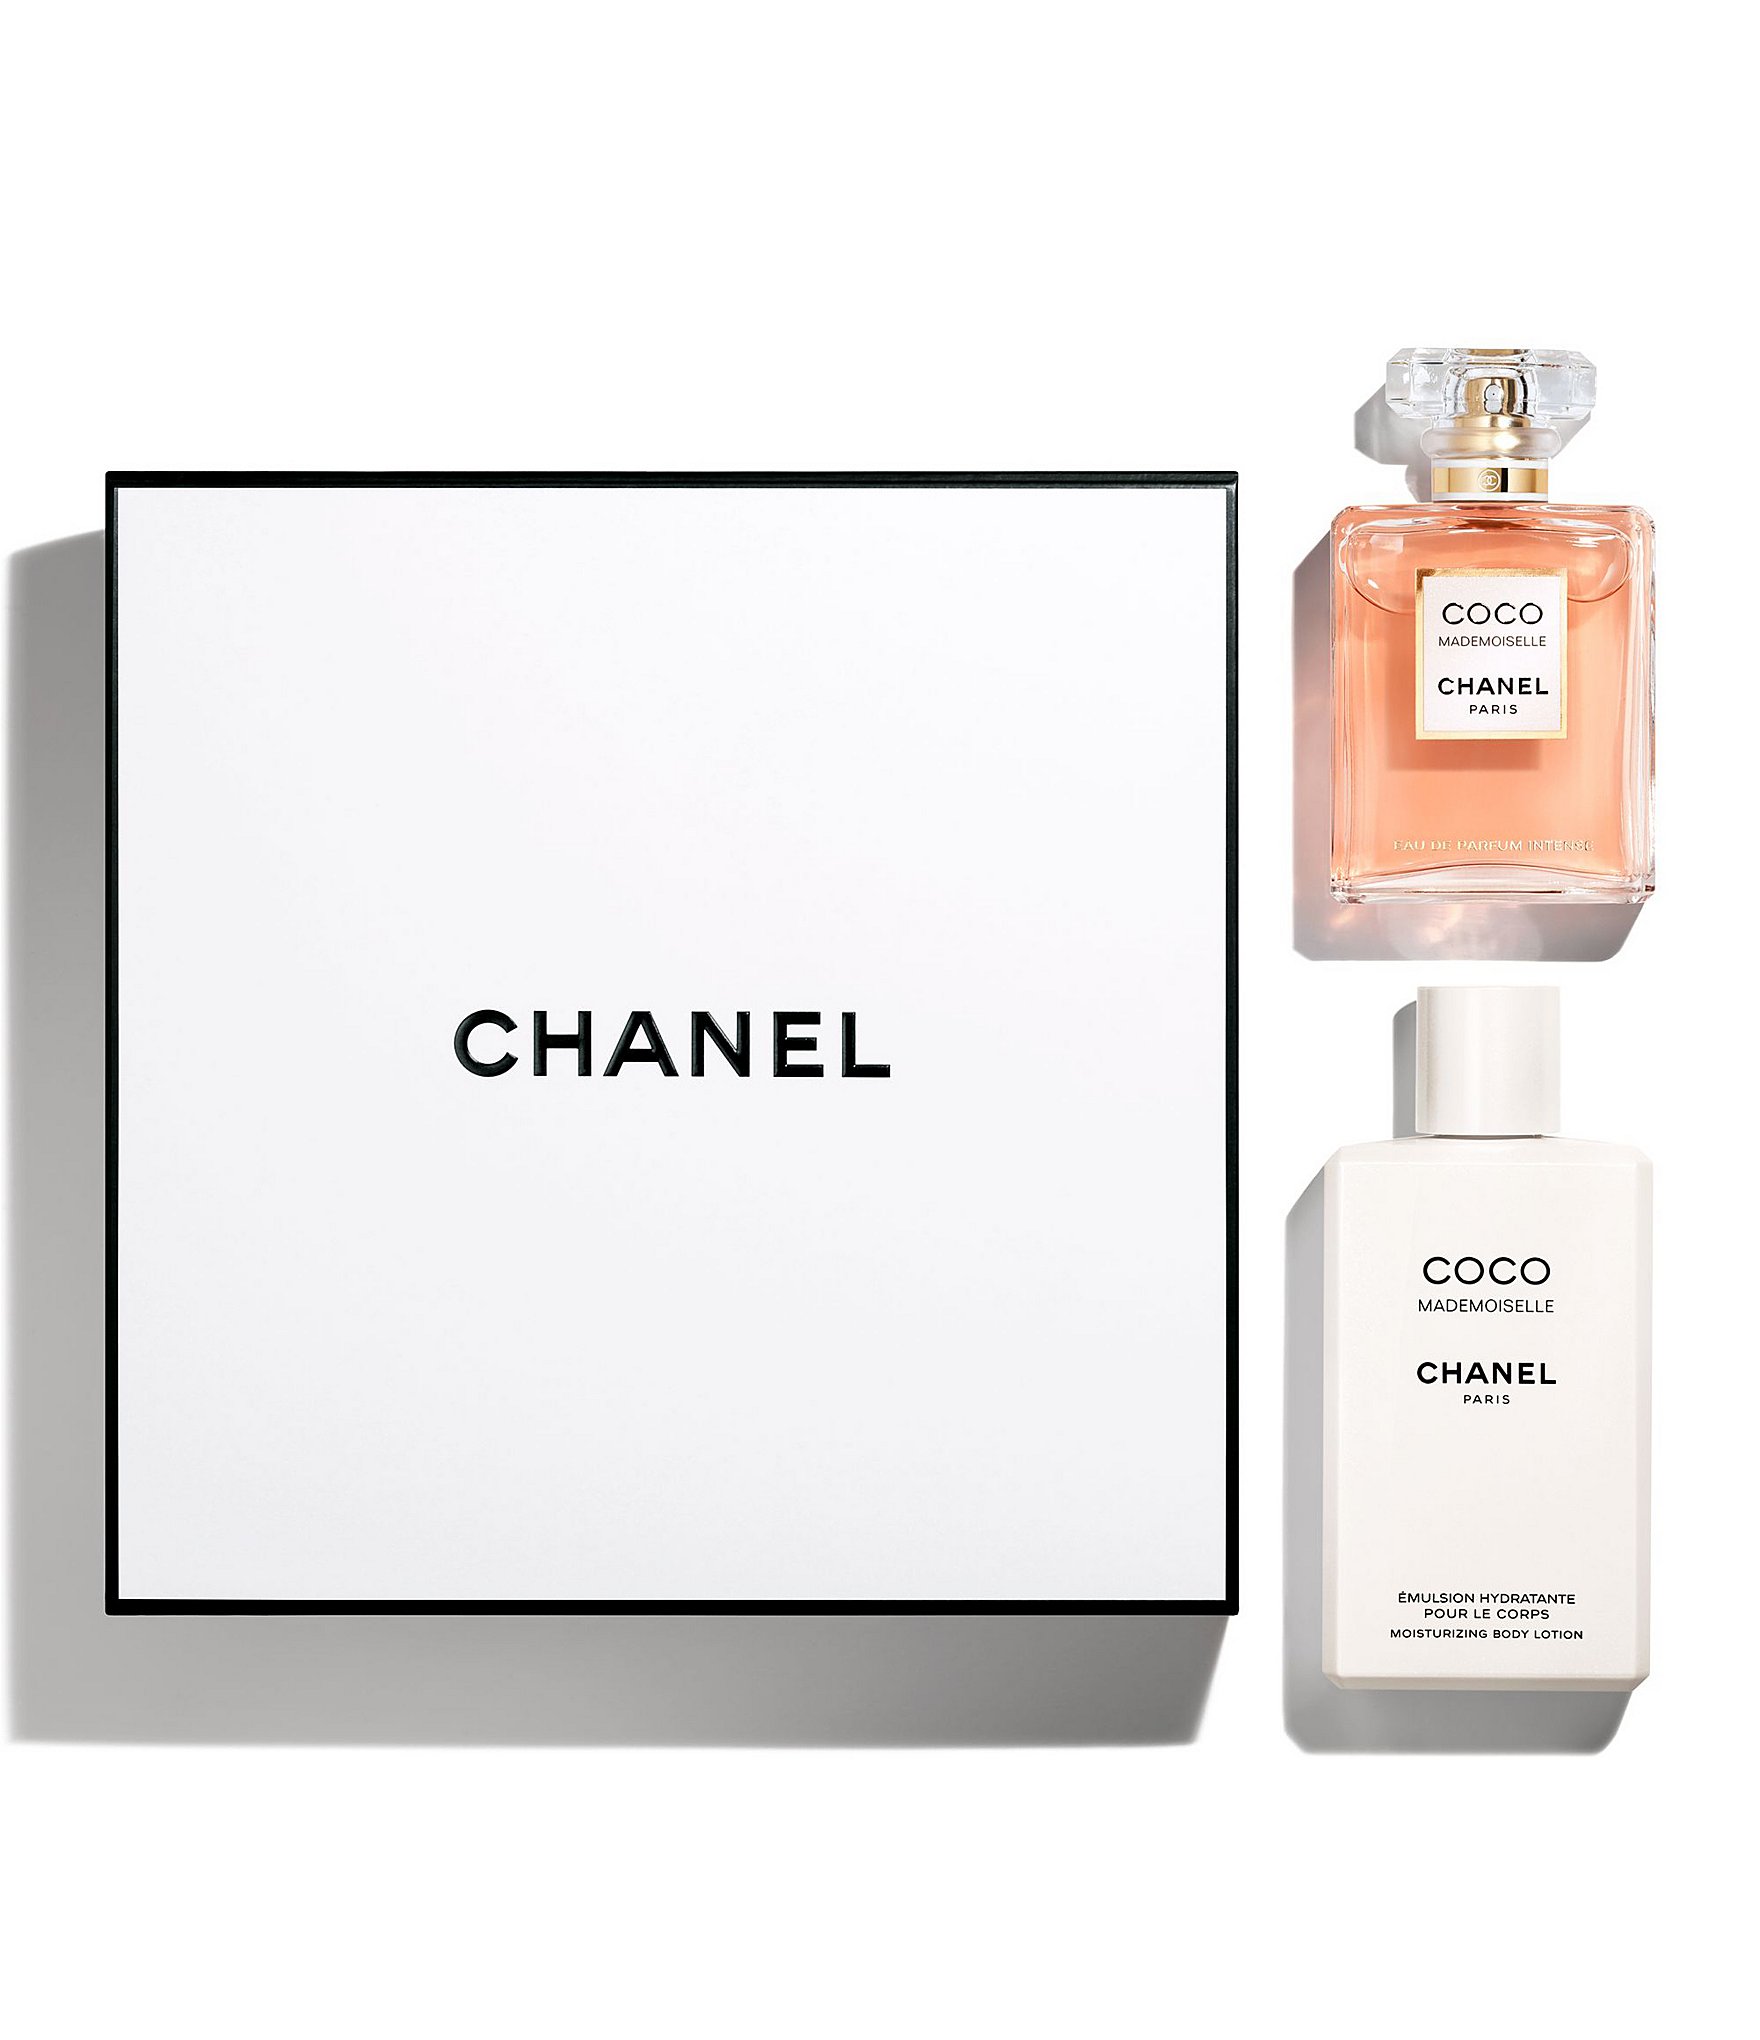 coco chanel body lotion gift set